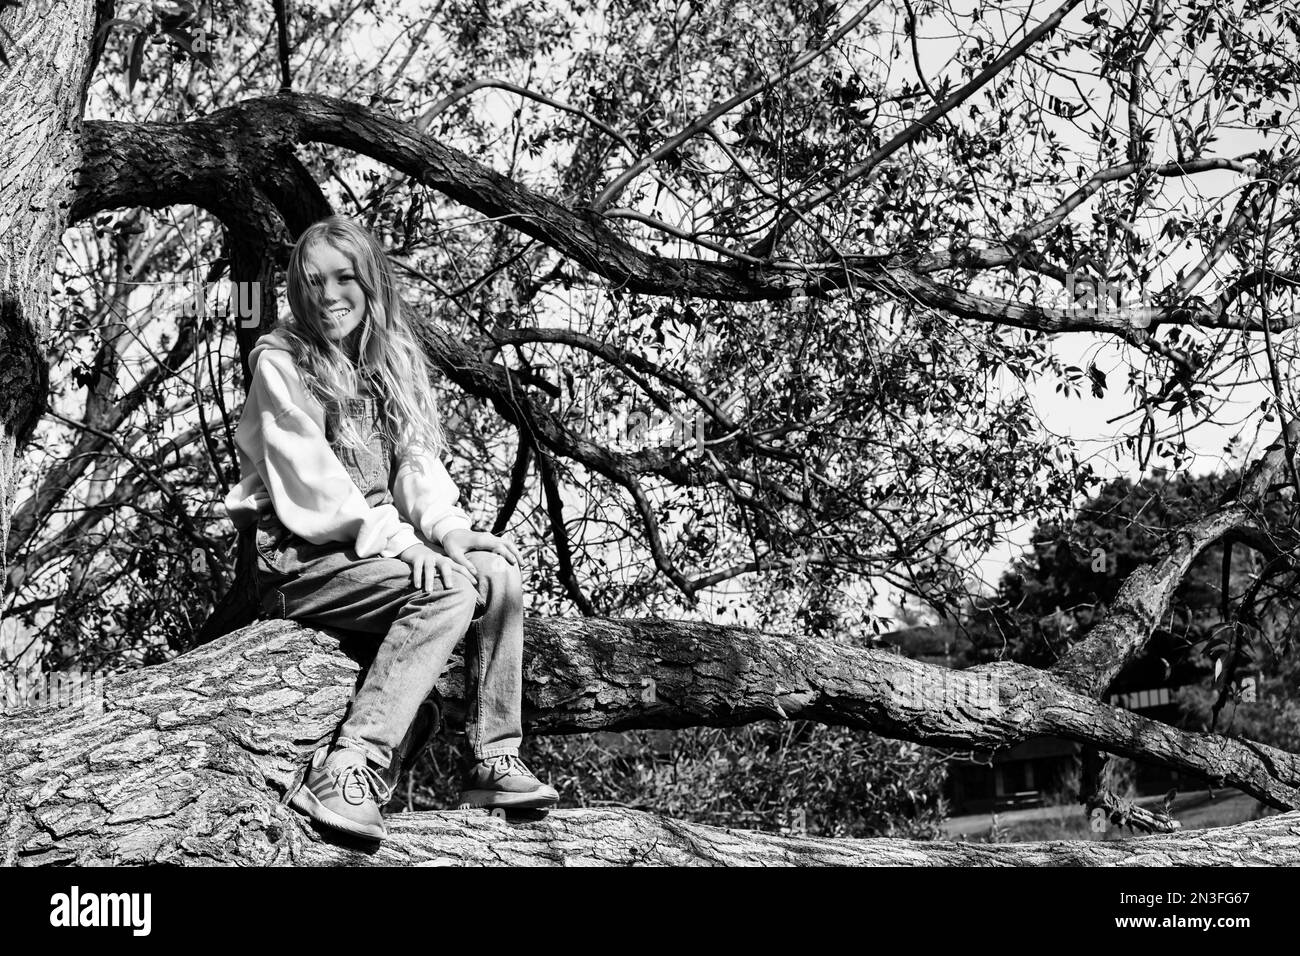 Black and white portrait of a young girl posing for a picture in a tree during a family outing on a warm fall day in a city park Stock Photo